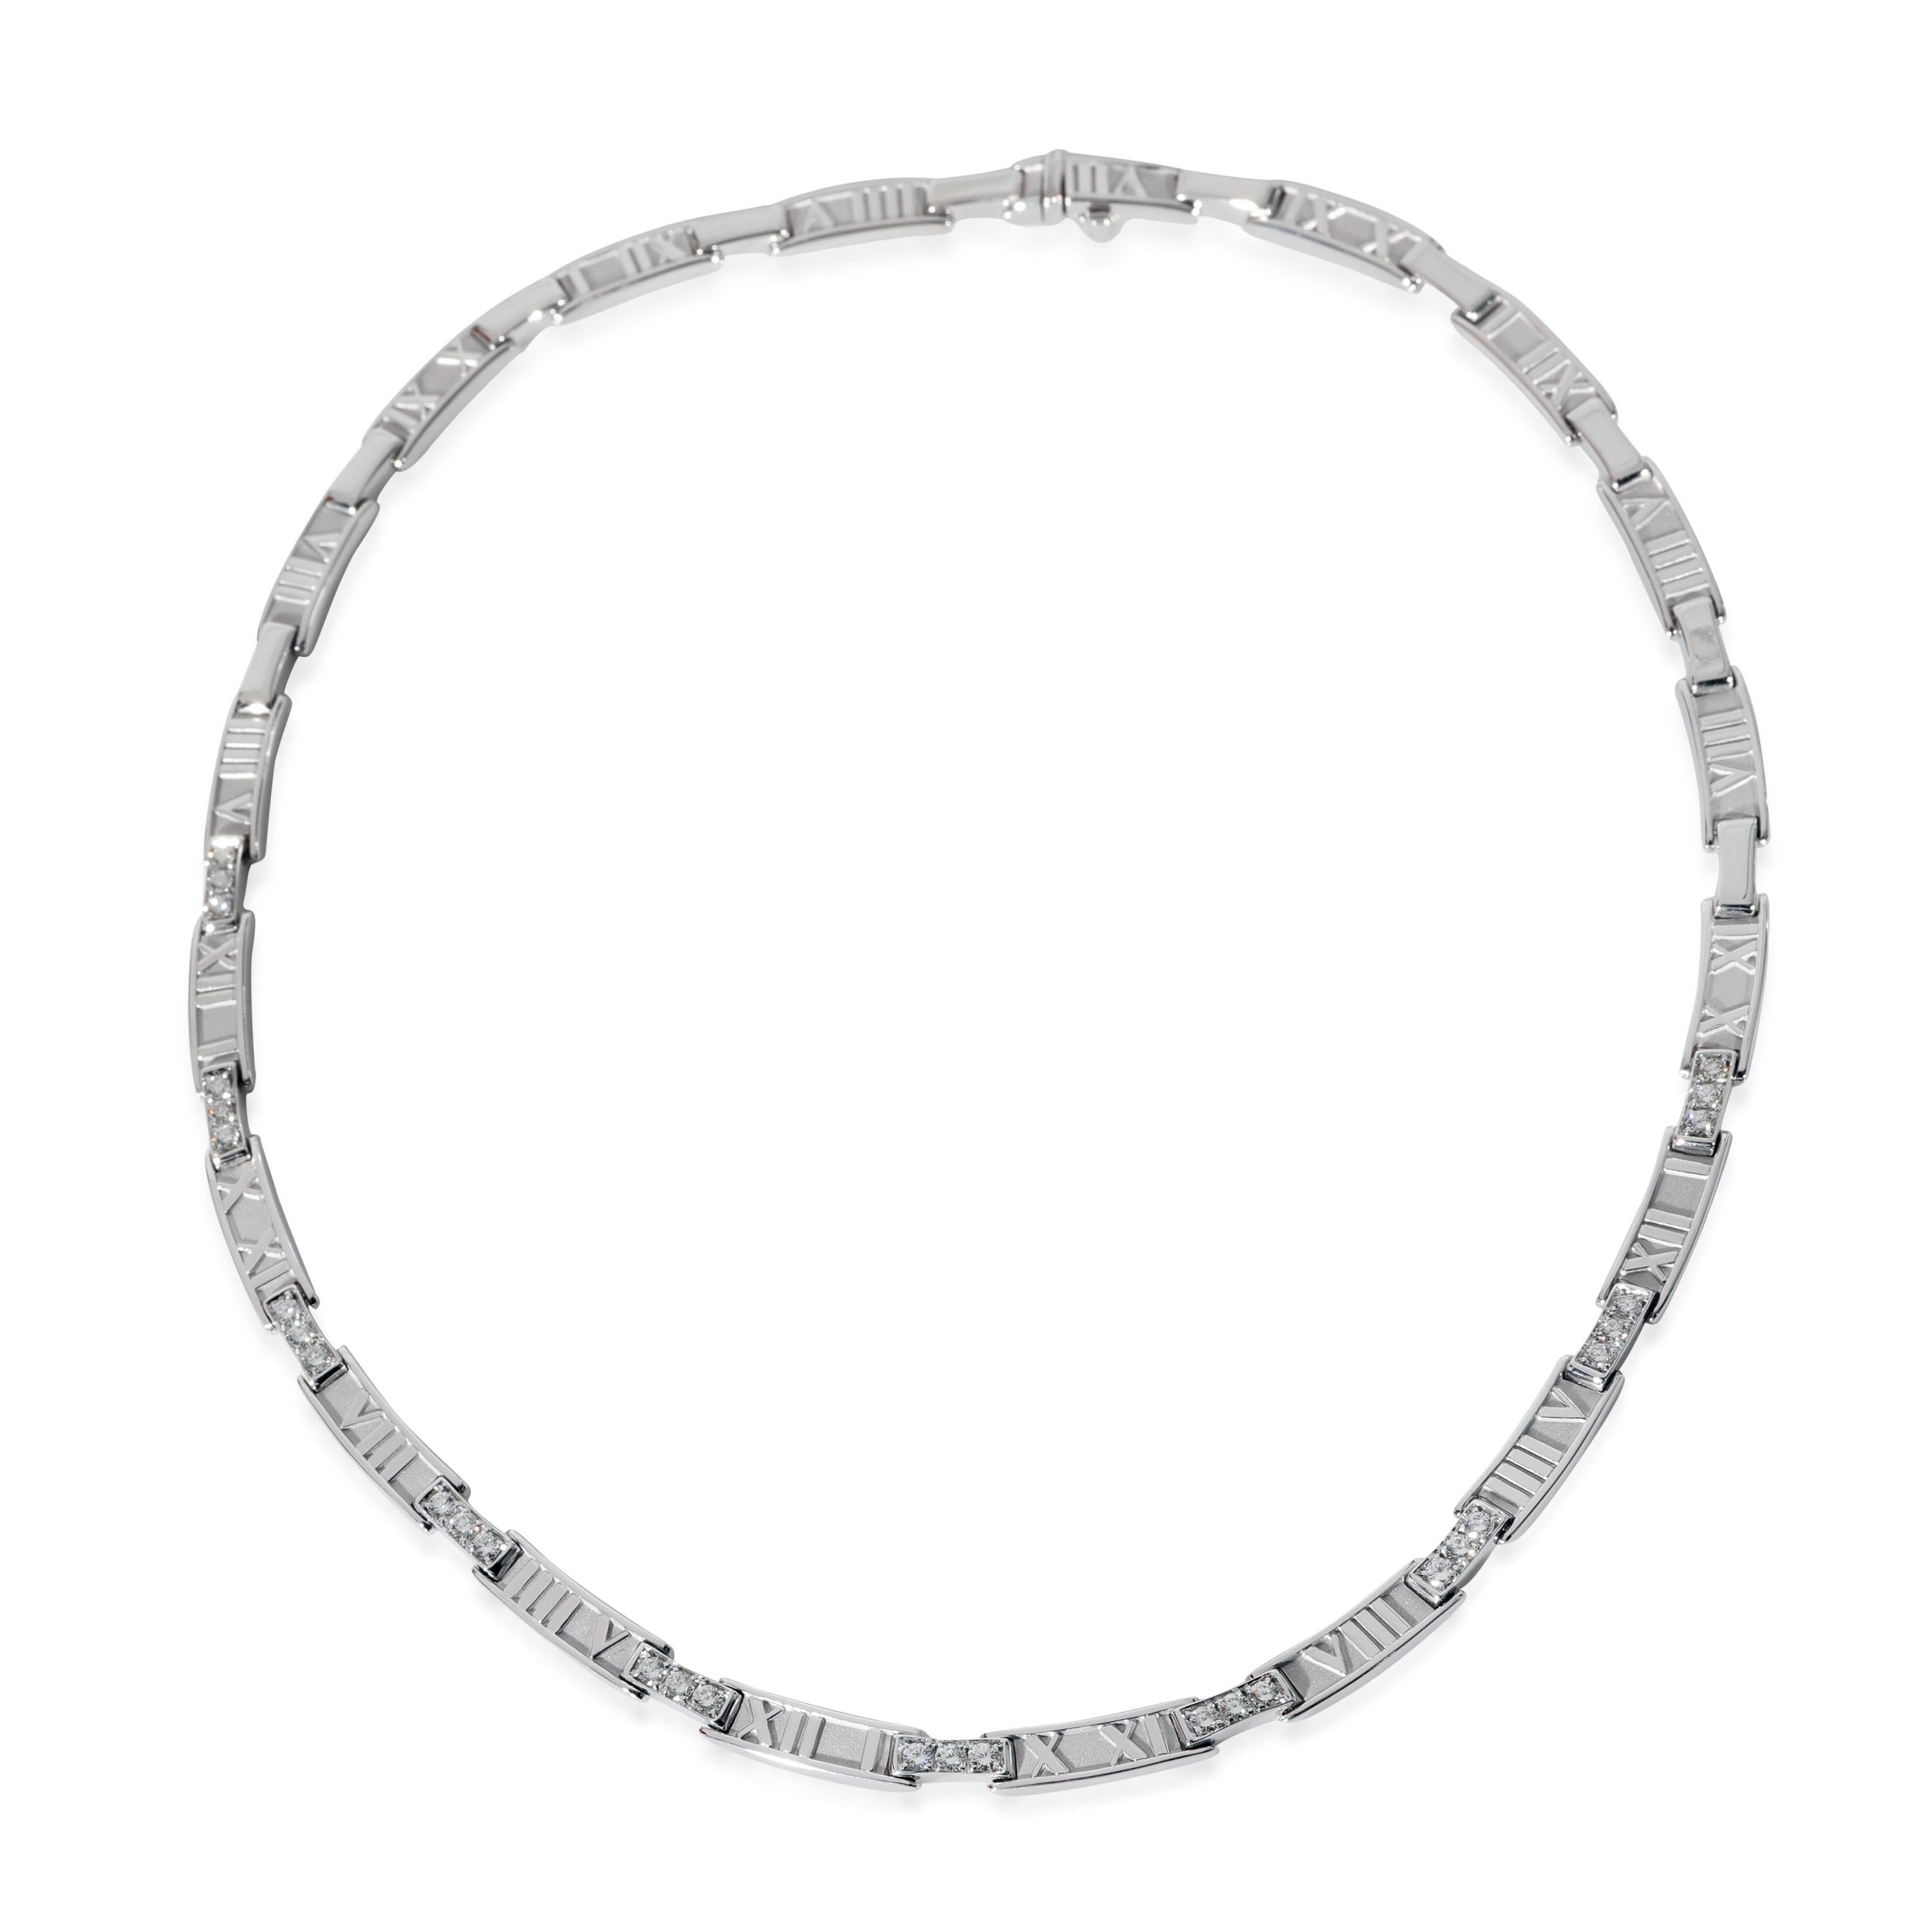 Tiffany & Co. Atlas Diamond Collar Necklace in 18k White Gold 1.5 CTW

PRIMARY DETAILS
SKU: 130569
Listing Title: Tiffany & Co. Atlas Diamond Collar Necklace in 18k White Gold 1.5 CTW
Condition Description: Above Tiffany's New York flagship store is